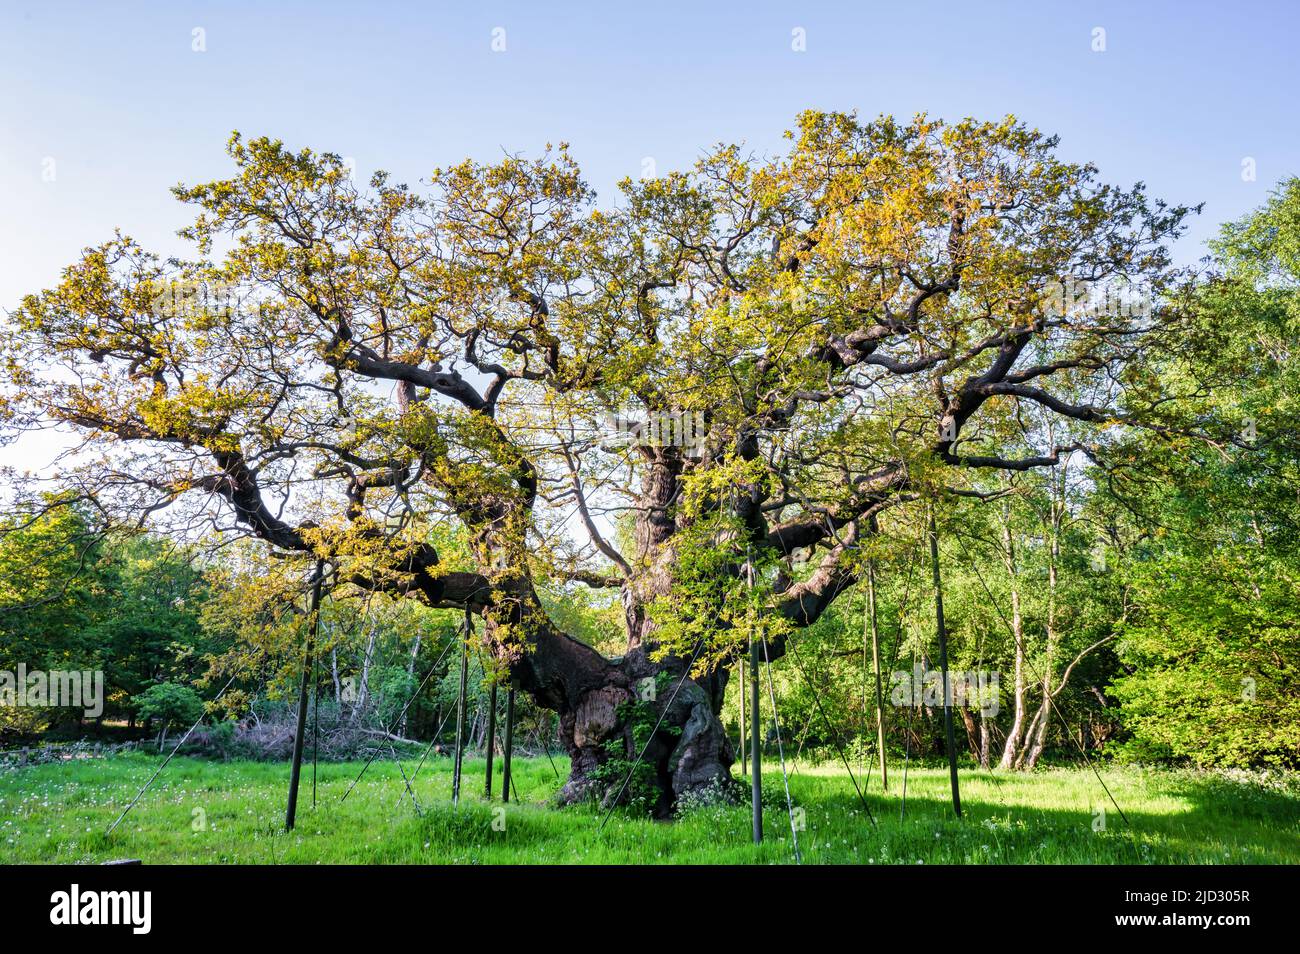 The Major Oak tree in Sherwood Forest, England Stock Photo